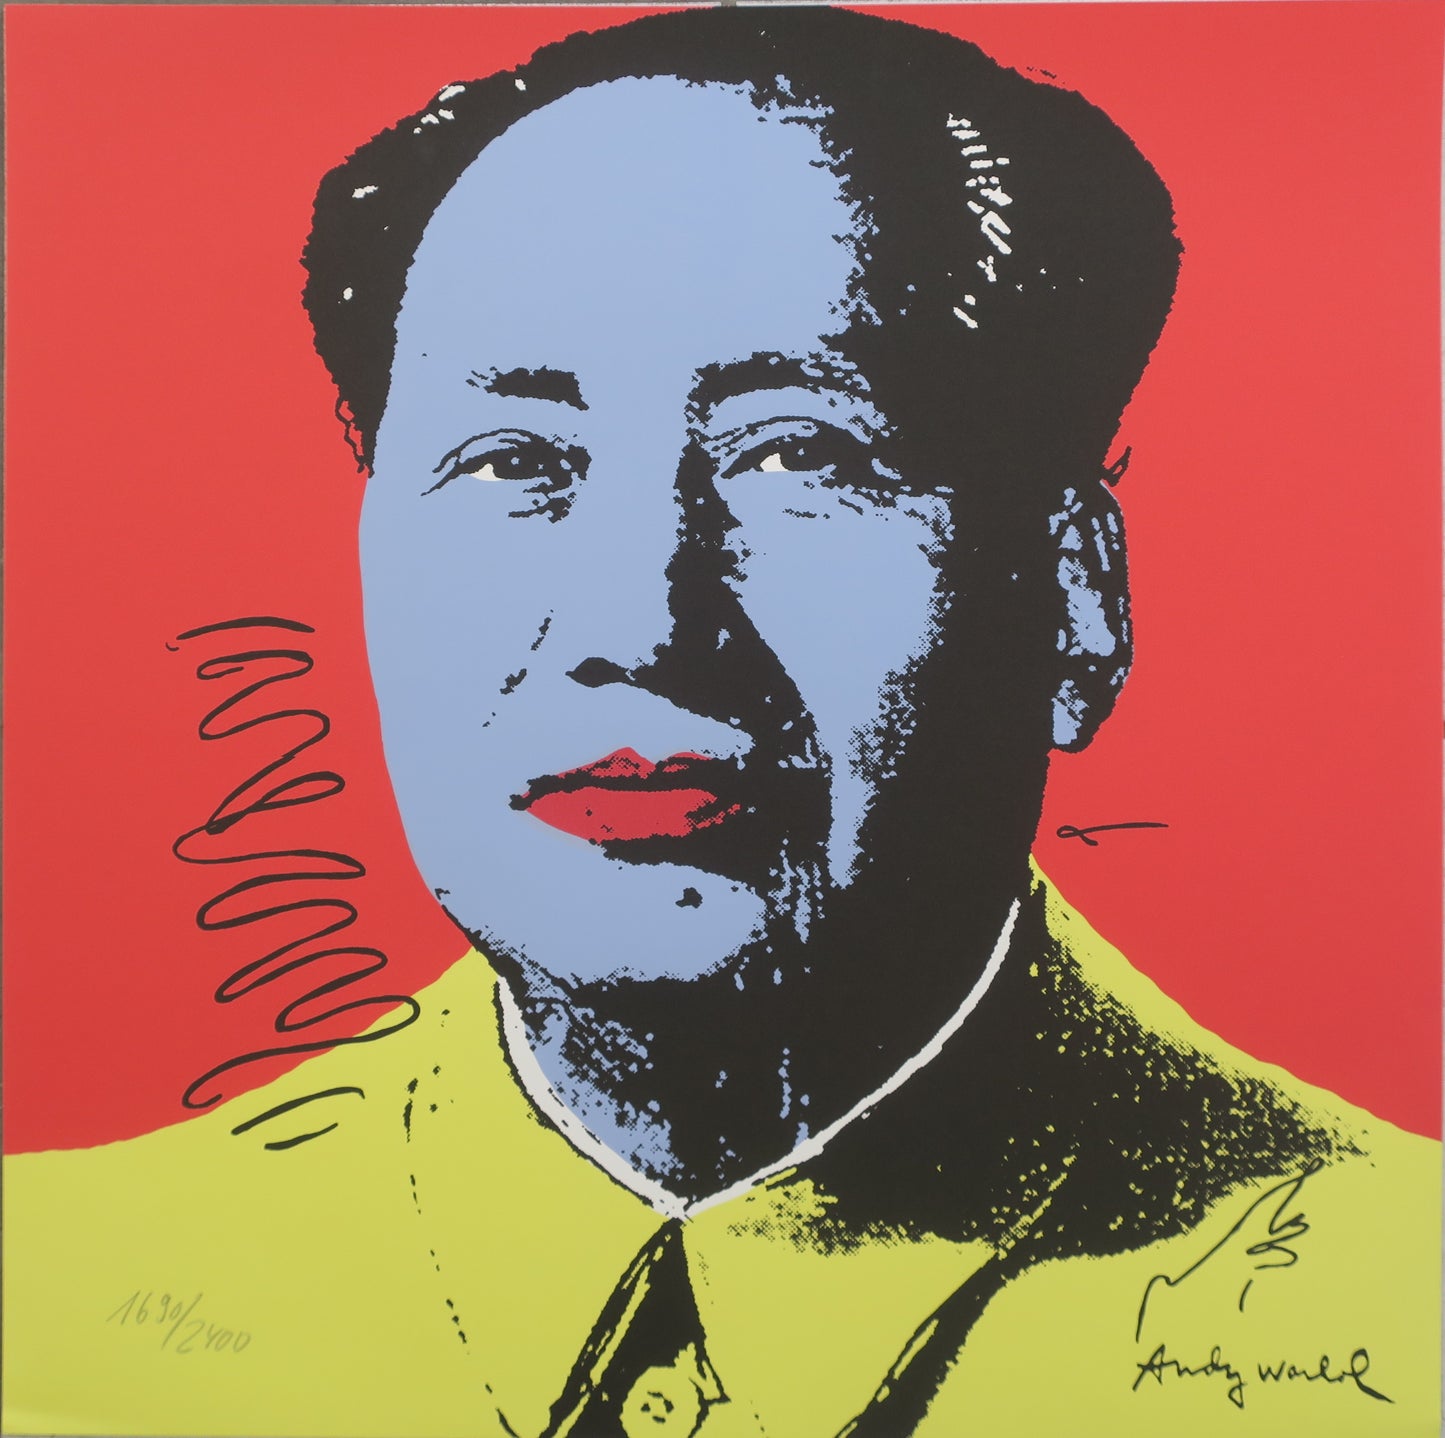 Andy Warhol Mao 92 Lithograph newPOPart